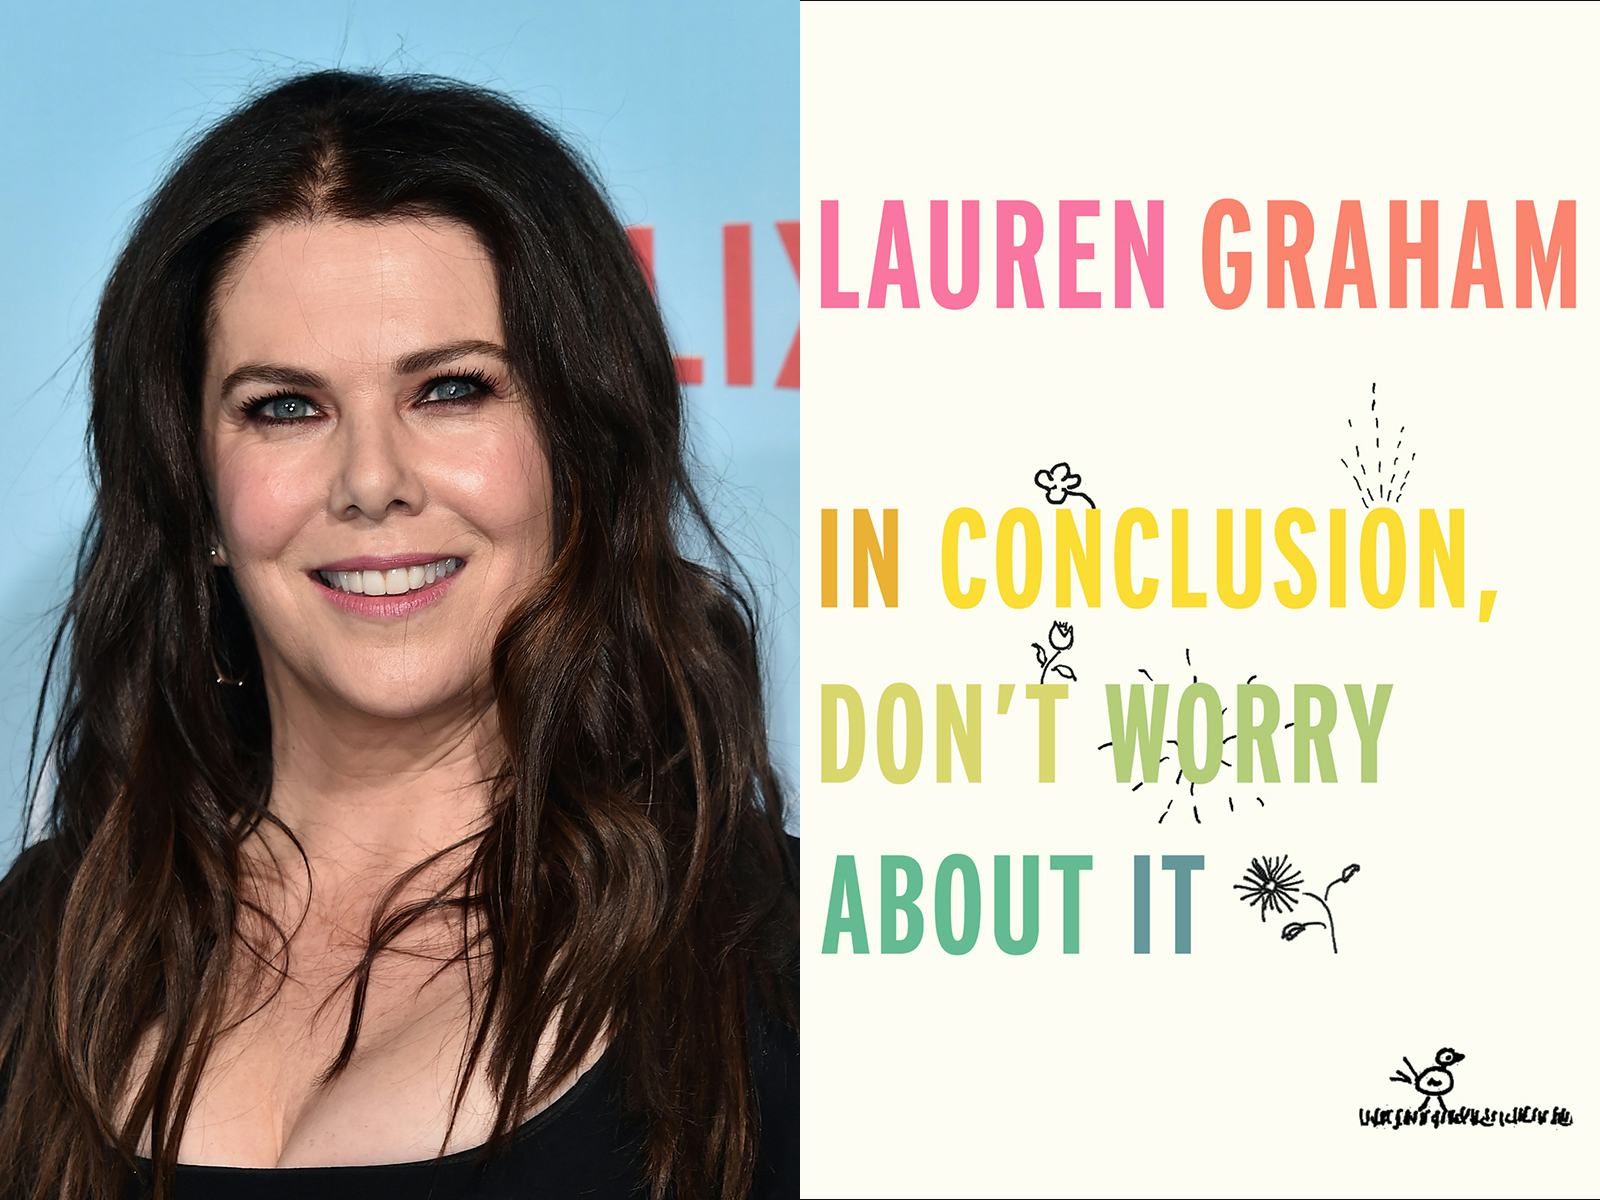 Lauren Graham's New Book 'In Conclusion, Don't Worry About It' Is Going